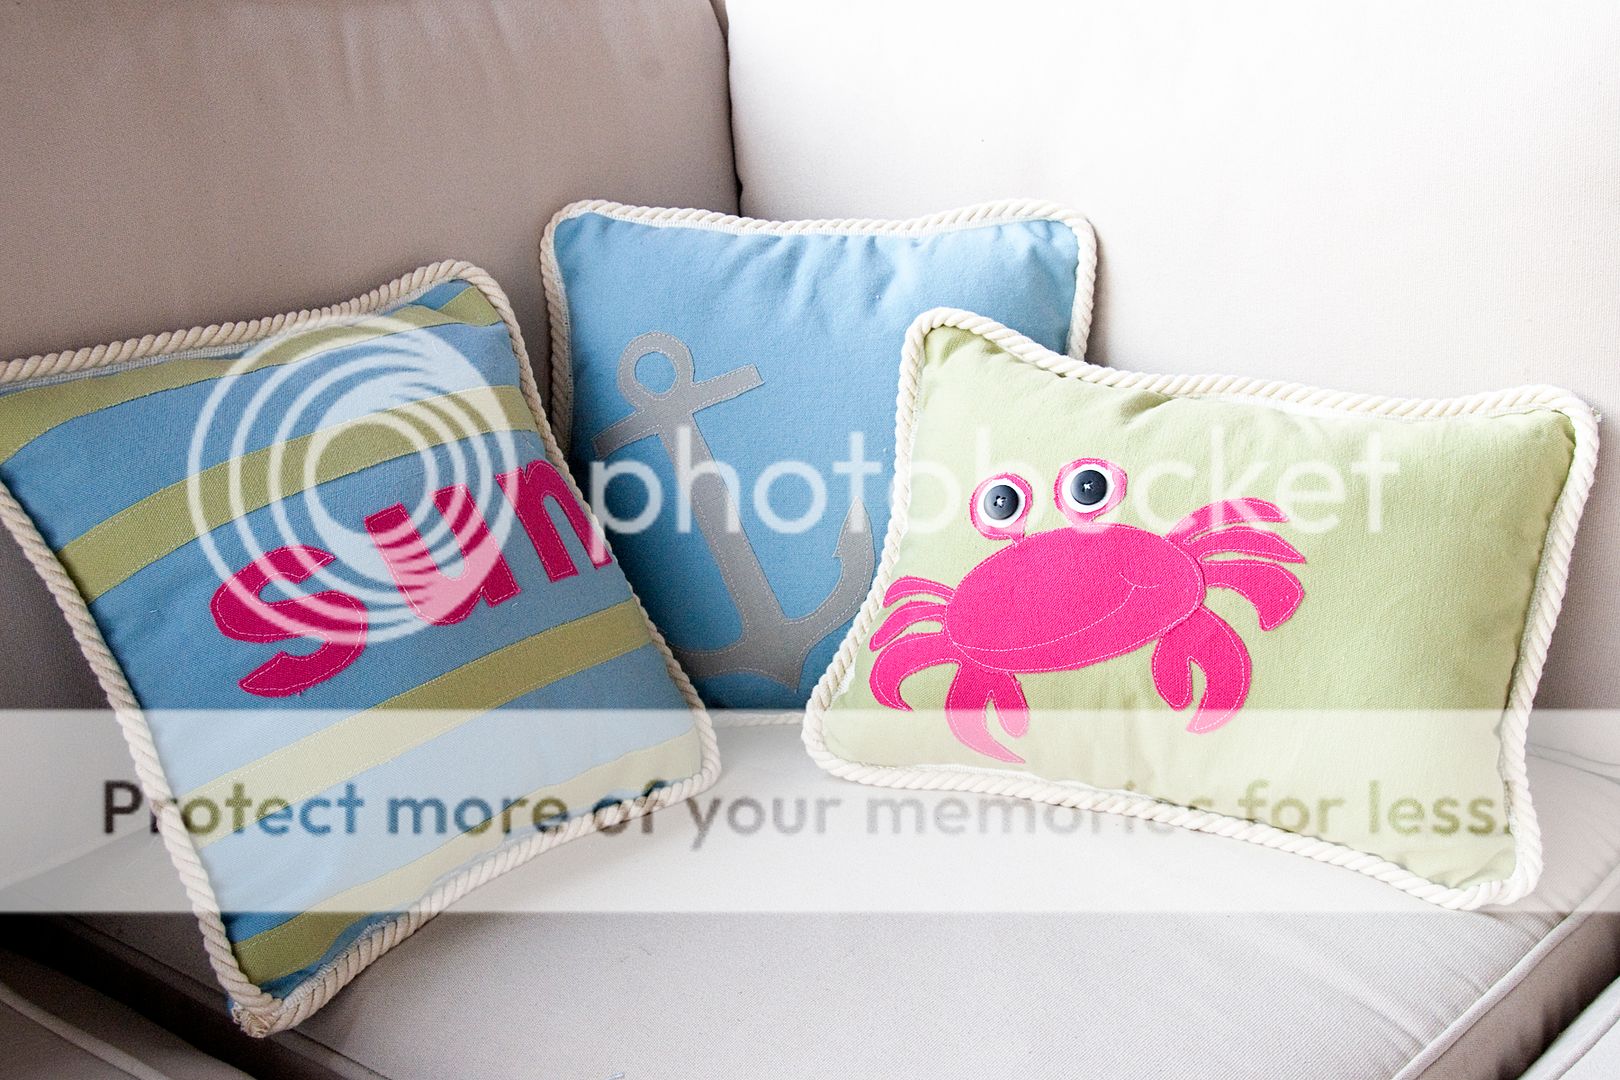 Summer Pillows- with free appliqué patterns